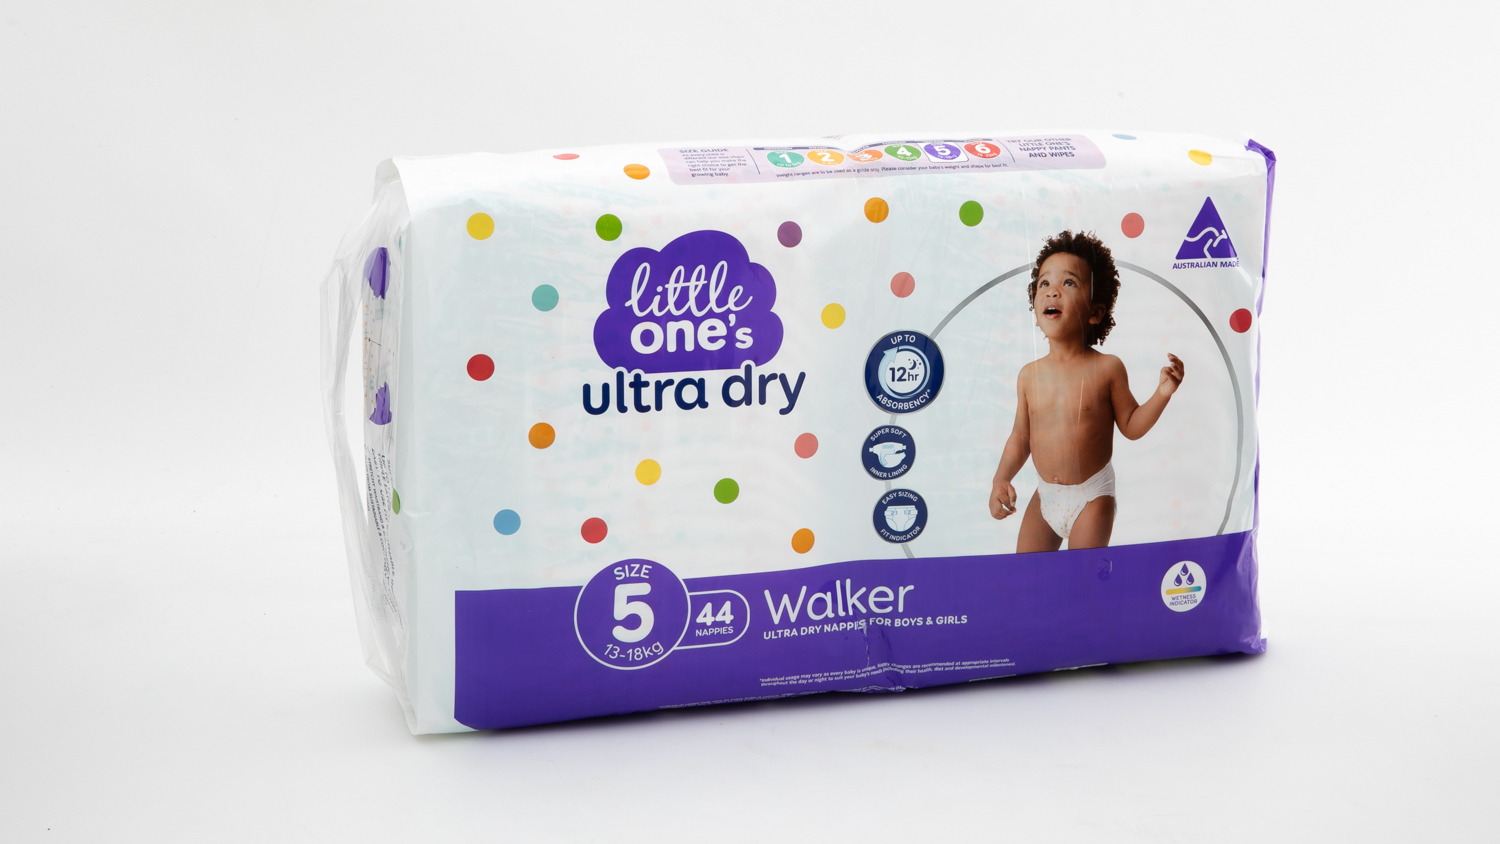 Woolworths Little One's Ultra Dry Nappies Walker Size 5 carousel image